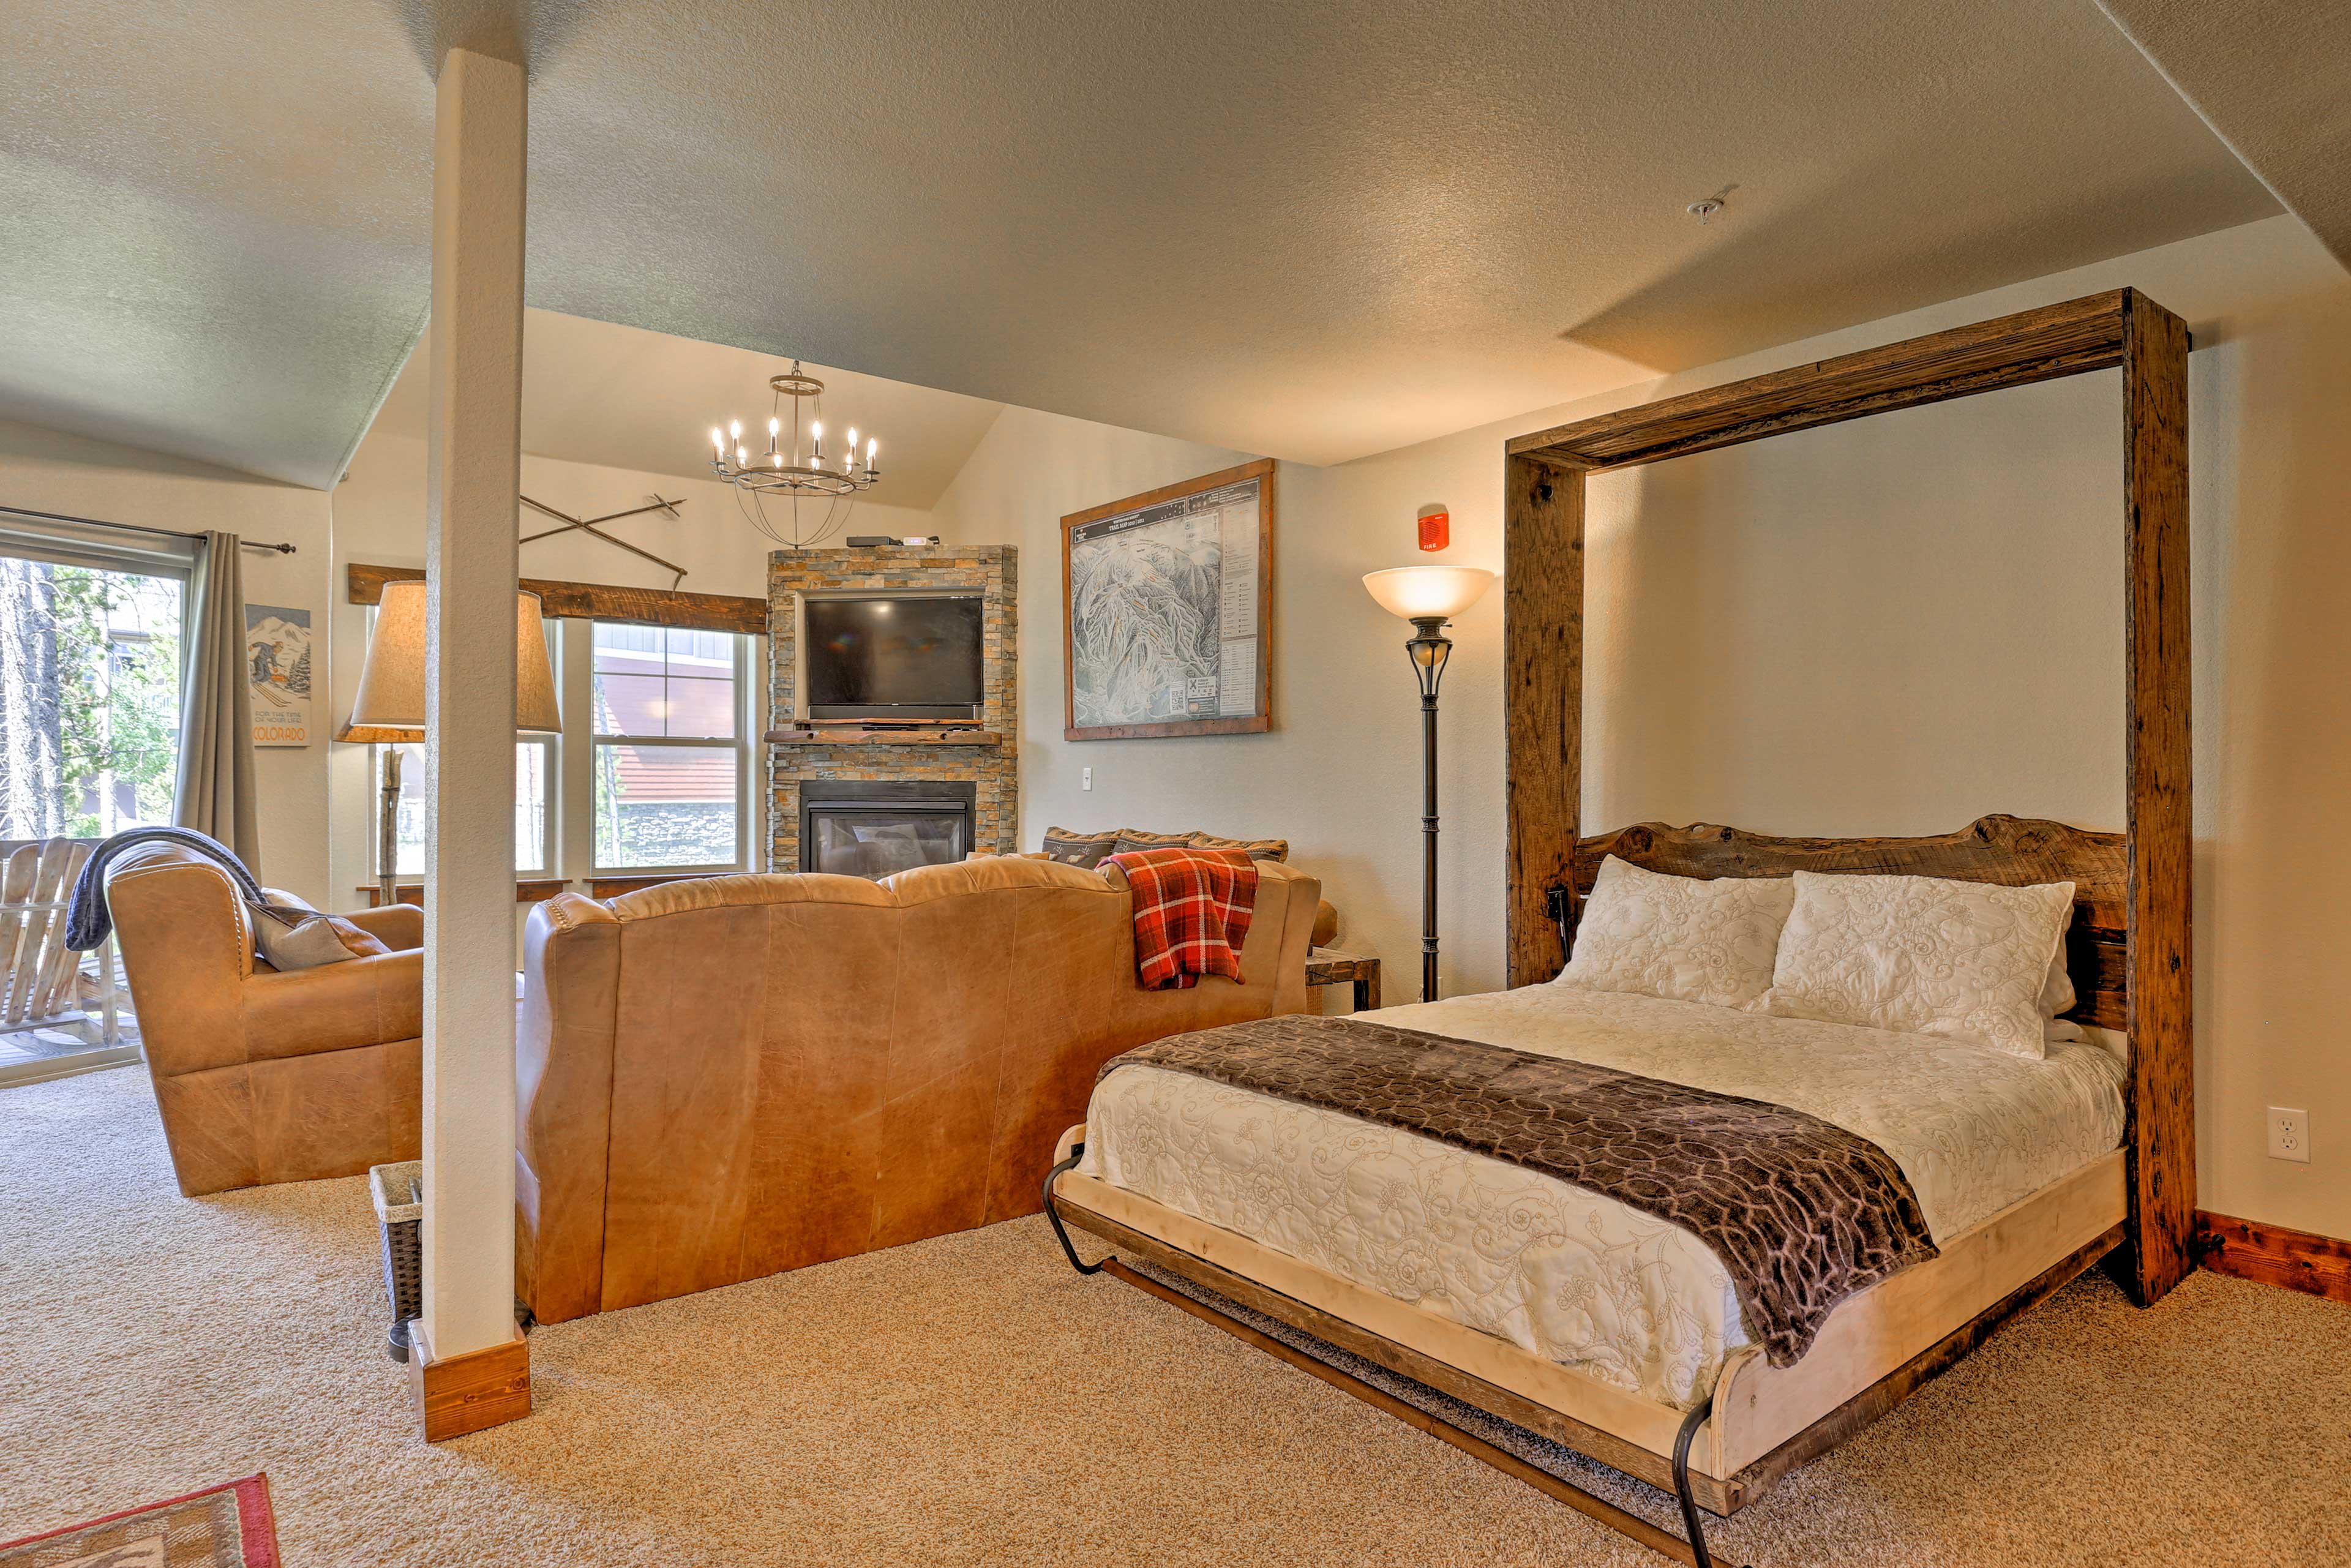 Two can share this queen-sized Murphy bed.